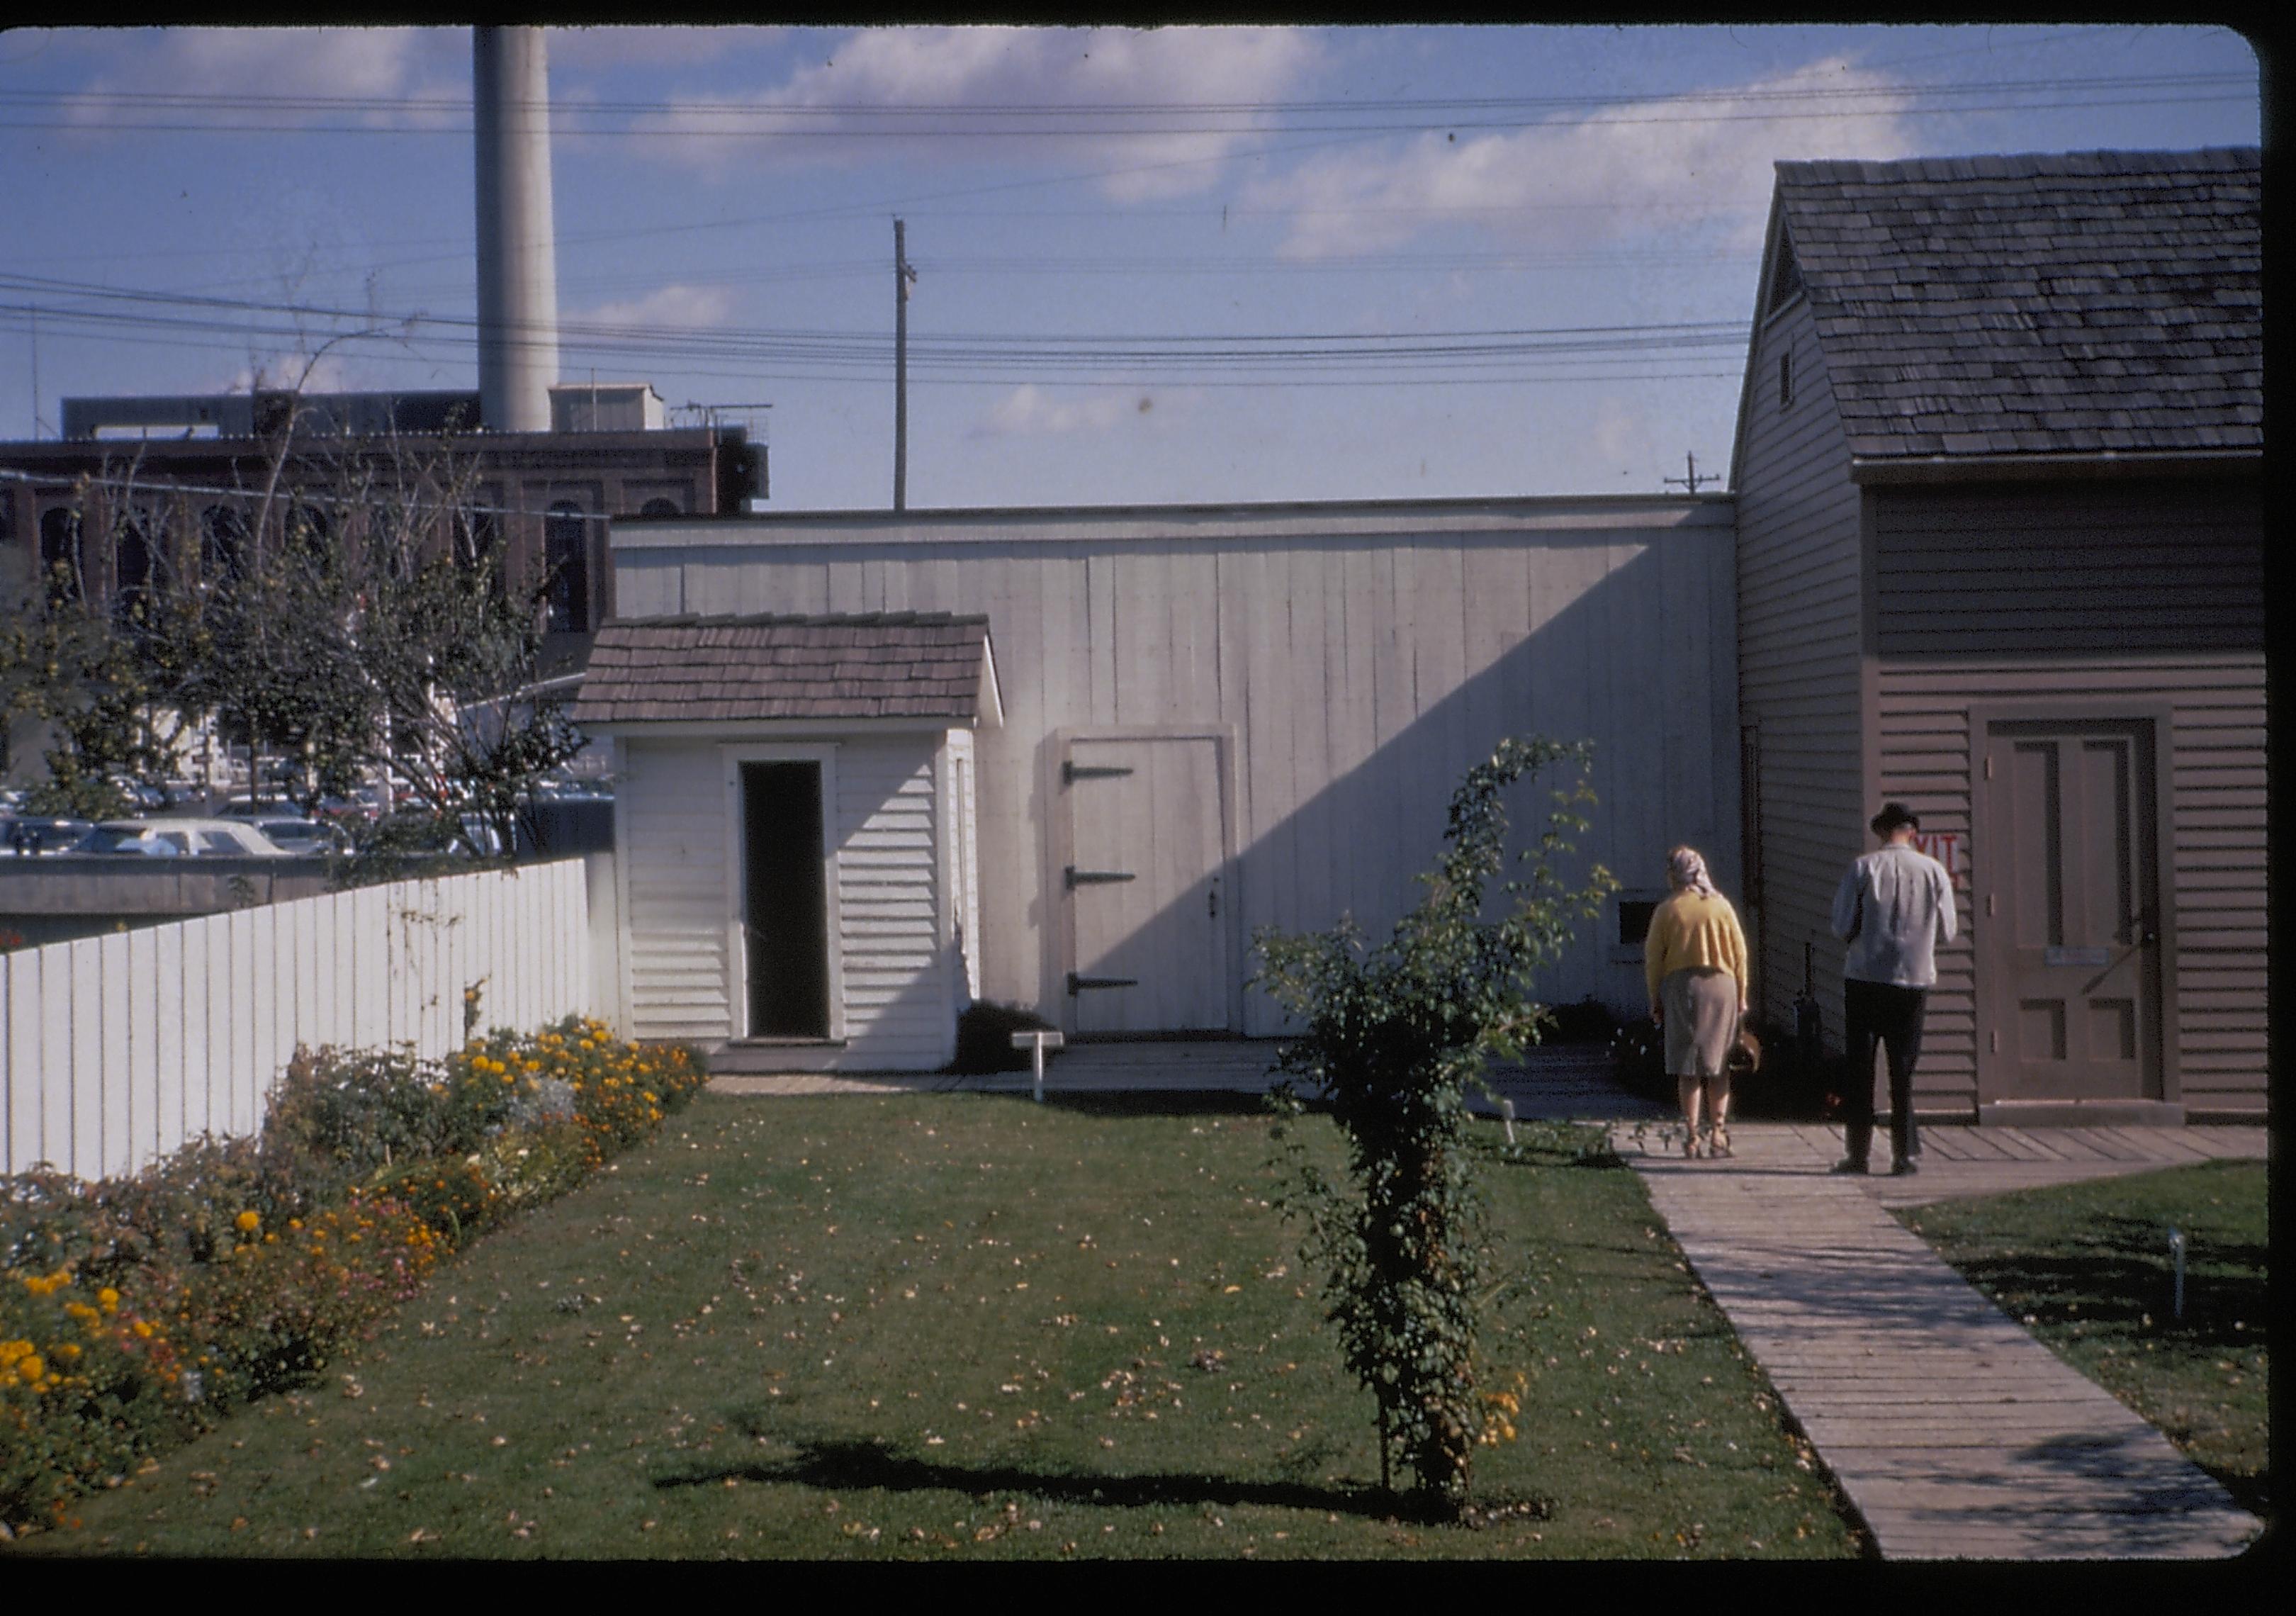 View of the Lincoln Home back yard, 1965, during the centennial of Lincoln's funeral. Photographer facing east.